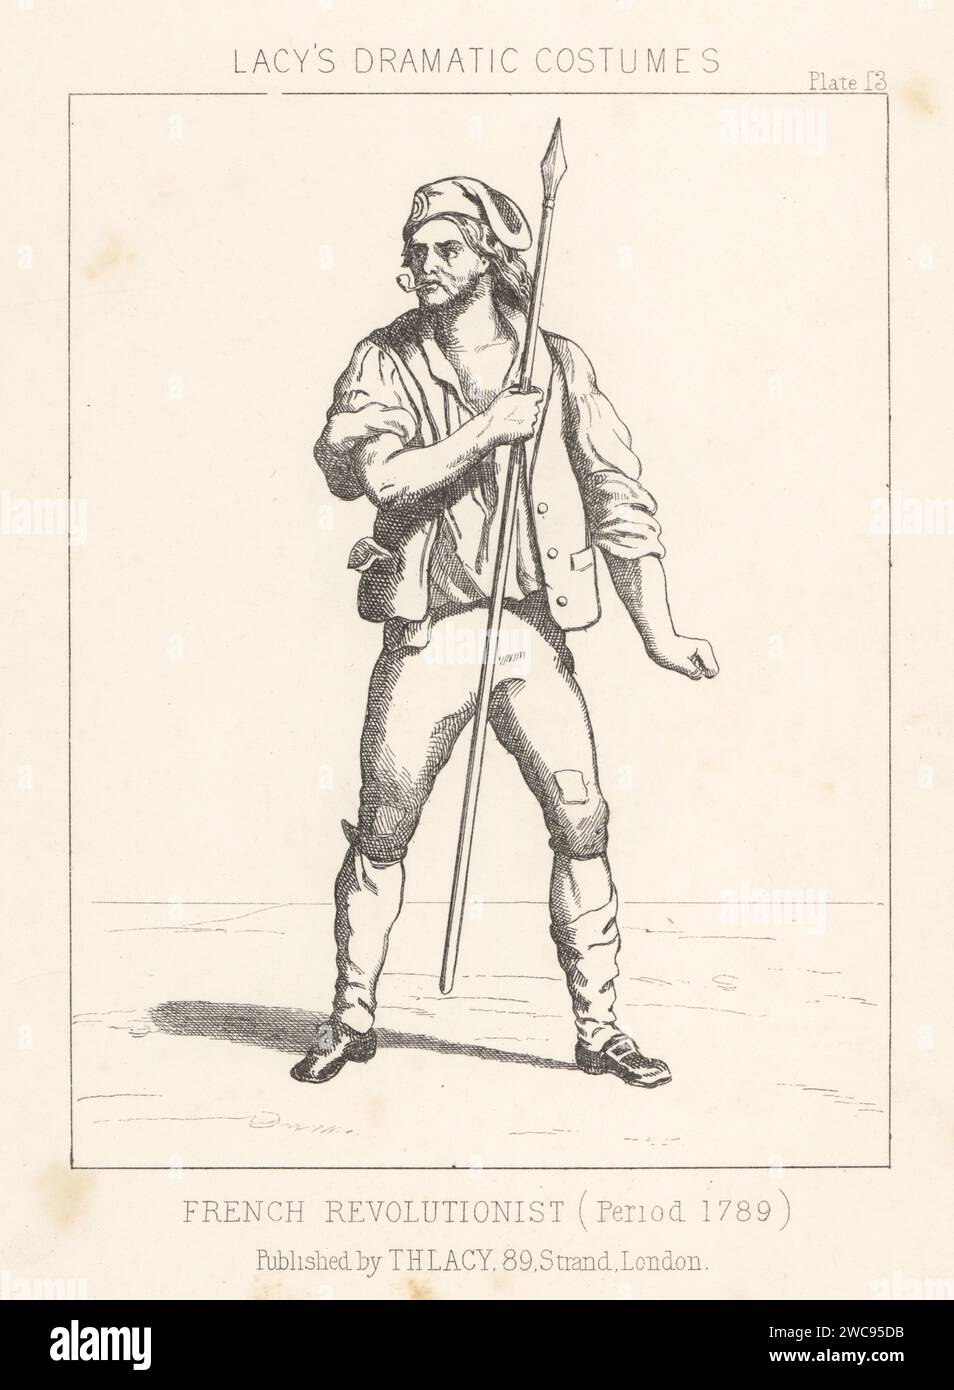 Costume of a French revolutionary or sans-culottes. In cap with tricolor cockade, jacket, patched trousers and gaiters, buckle shoes, armed with a lance. French revolutionist, period 1789. Lithograph from Thomas Hailes Lacy's Male Costumes, Historical, National and Dramatic in 200 Plates, London, 1865. Lacy (1809-1873) was a British actor, playwright, theatrical manager and publisher. Stock Photo